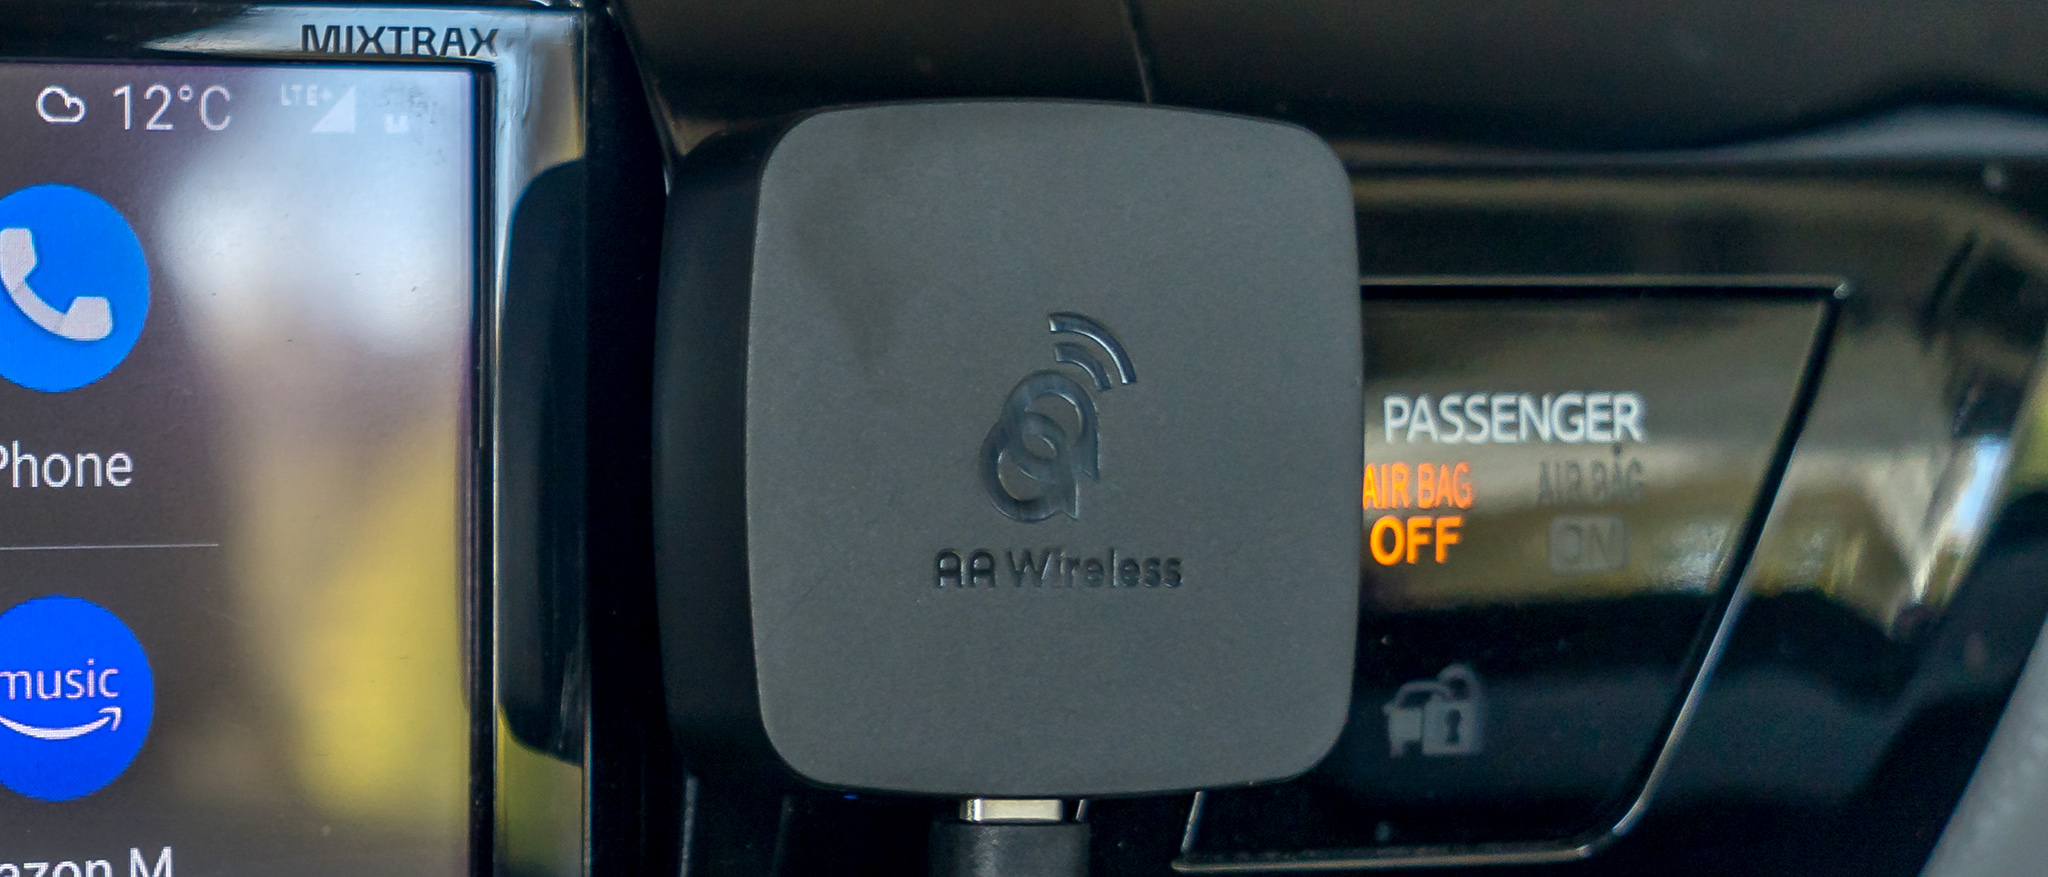 AAWireless review: Freeing Android Auto in your car